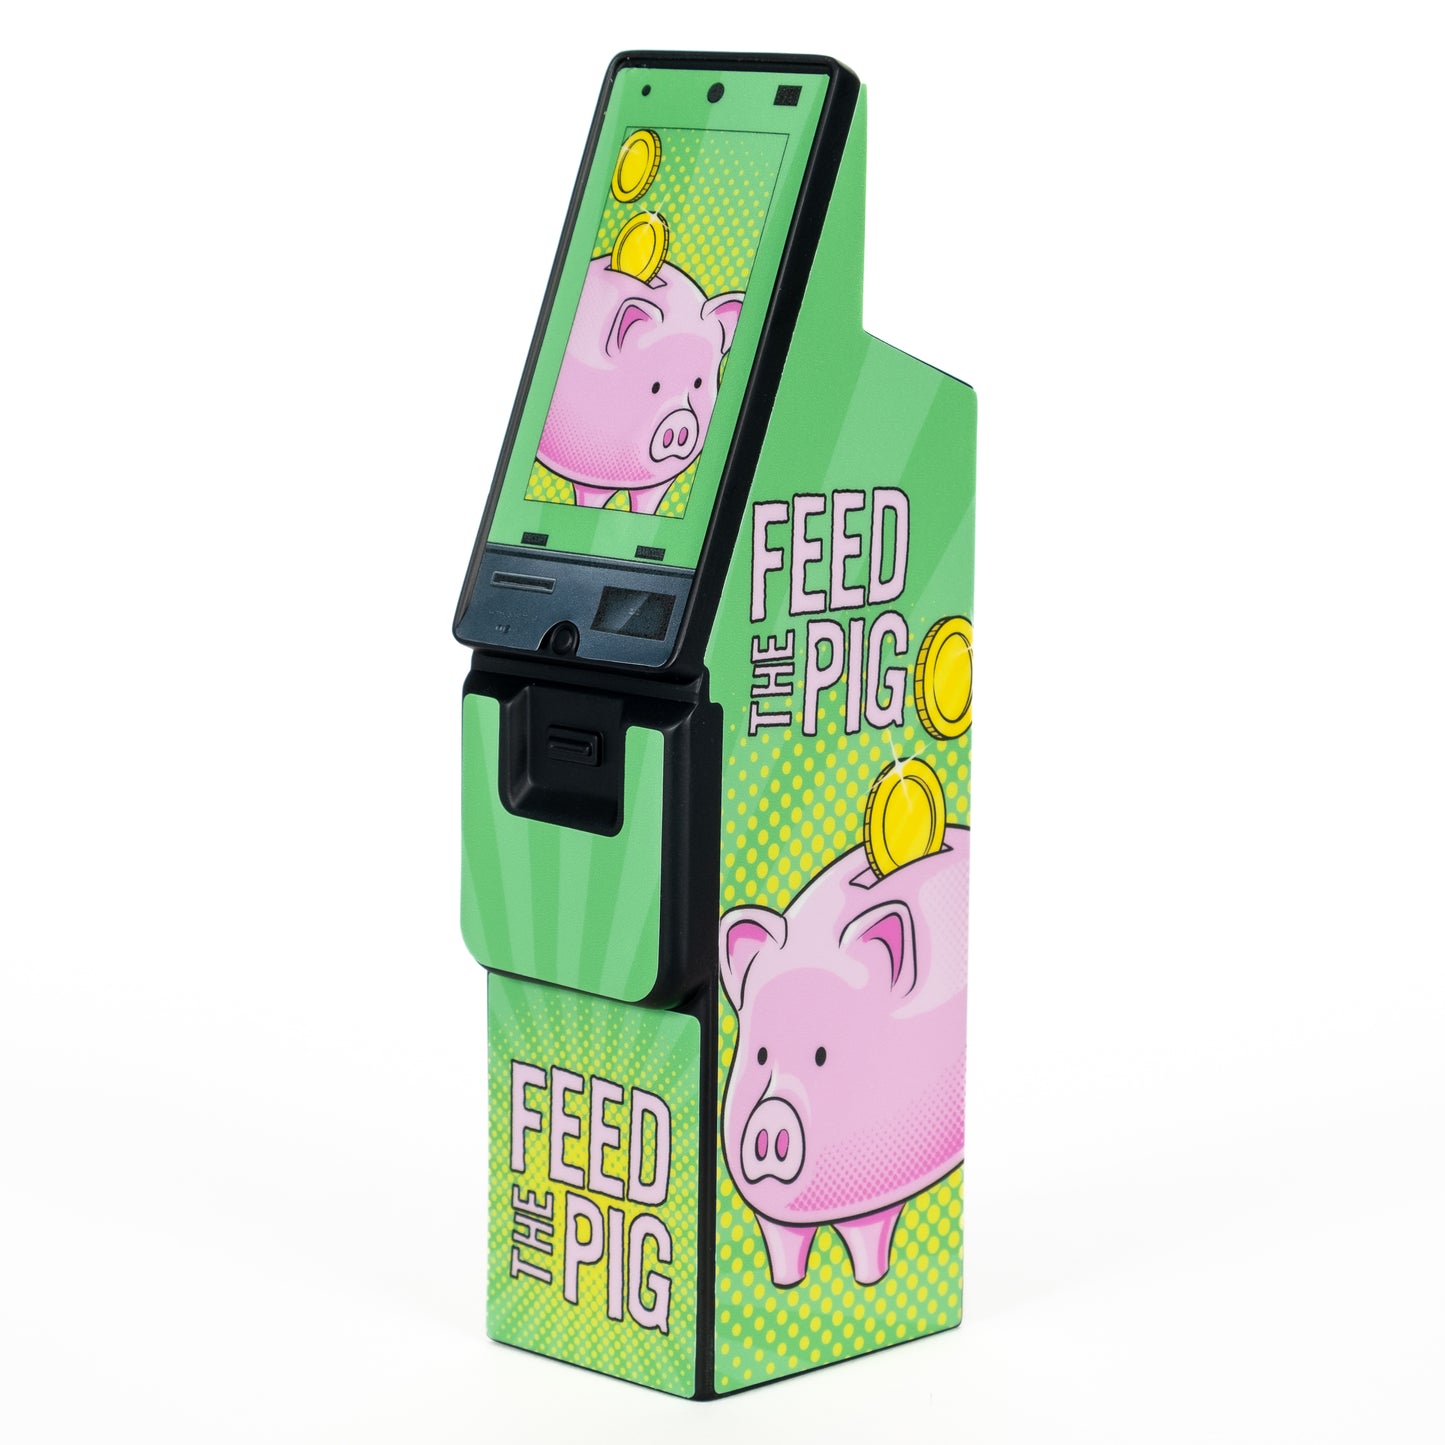 Gemini Mini Bank with a "Feed the Pig" wrap installed